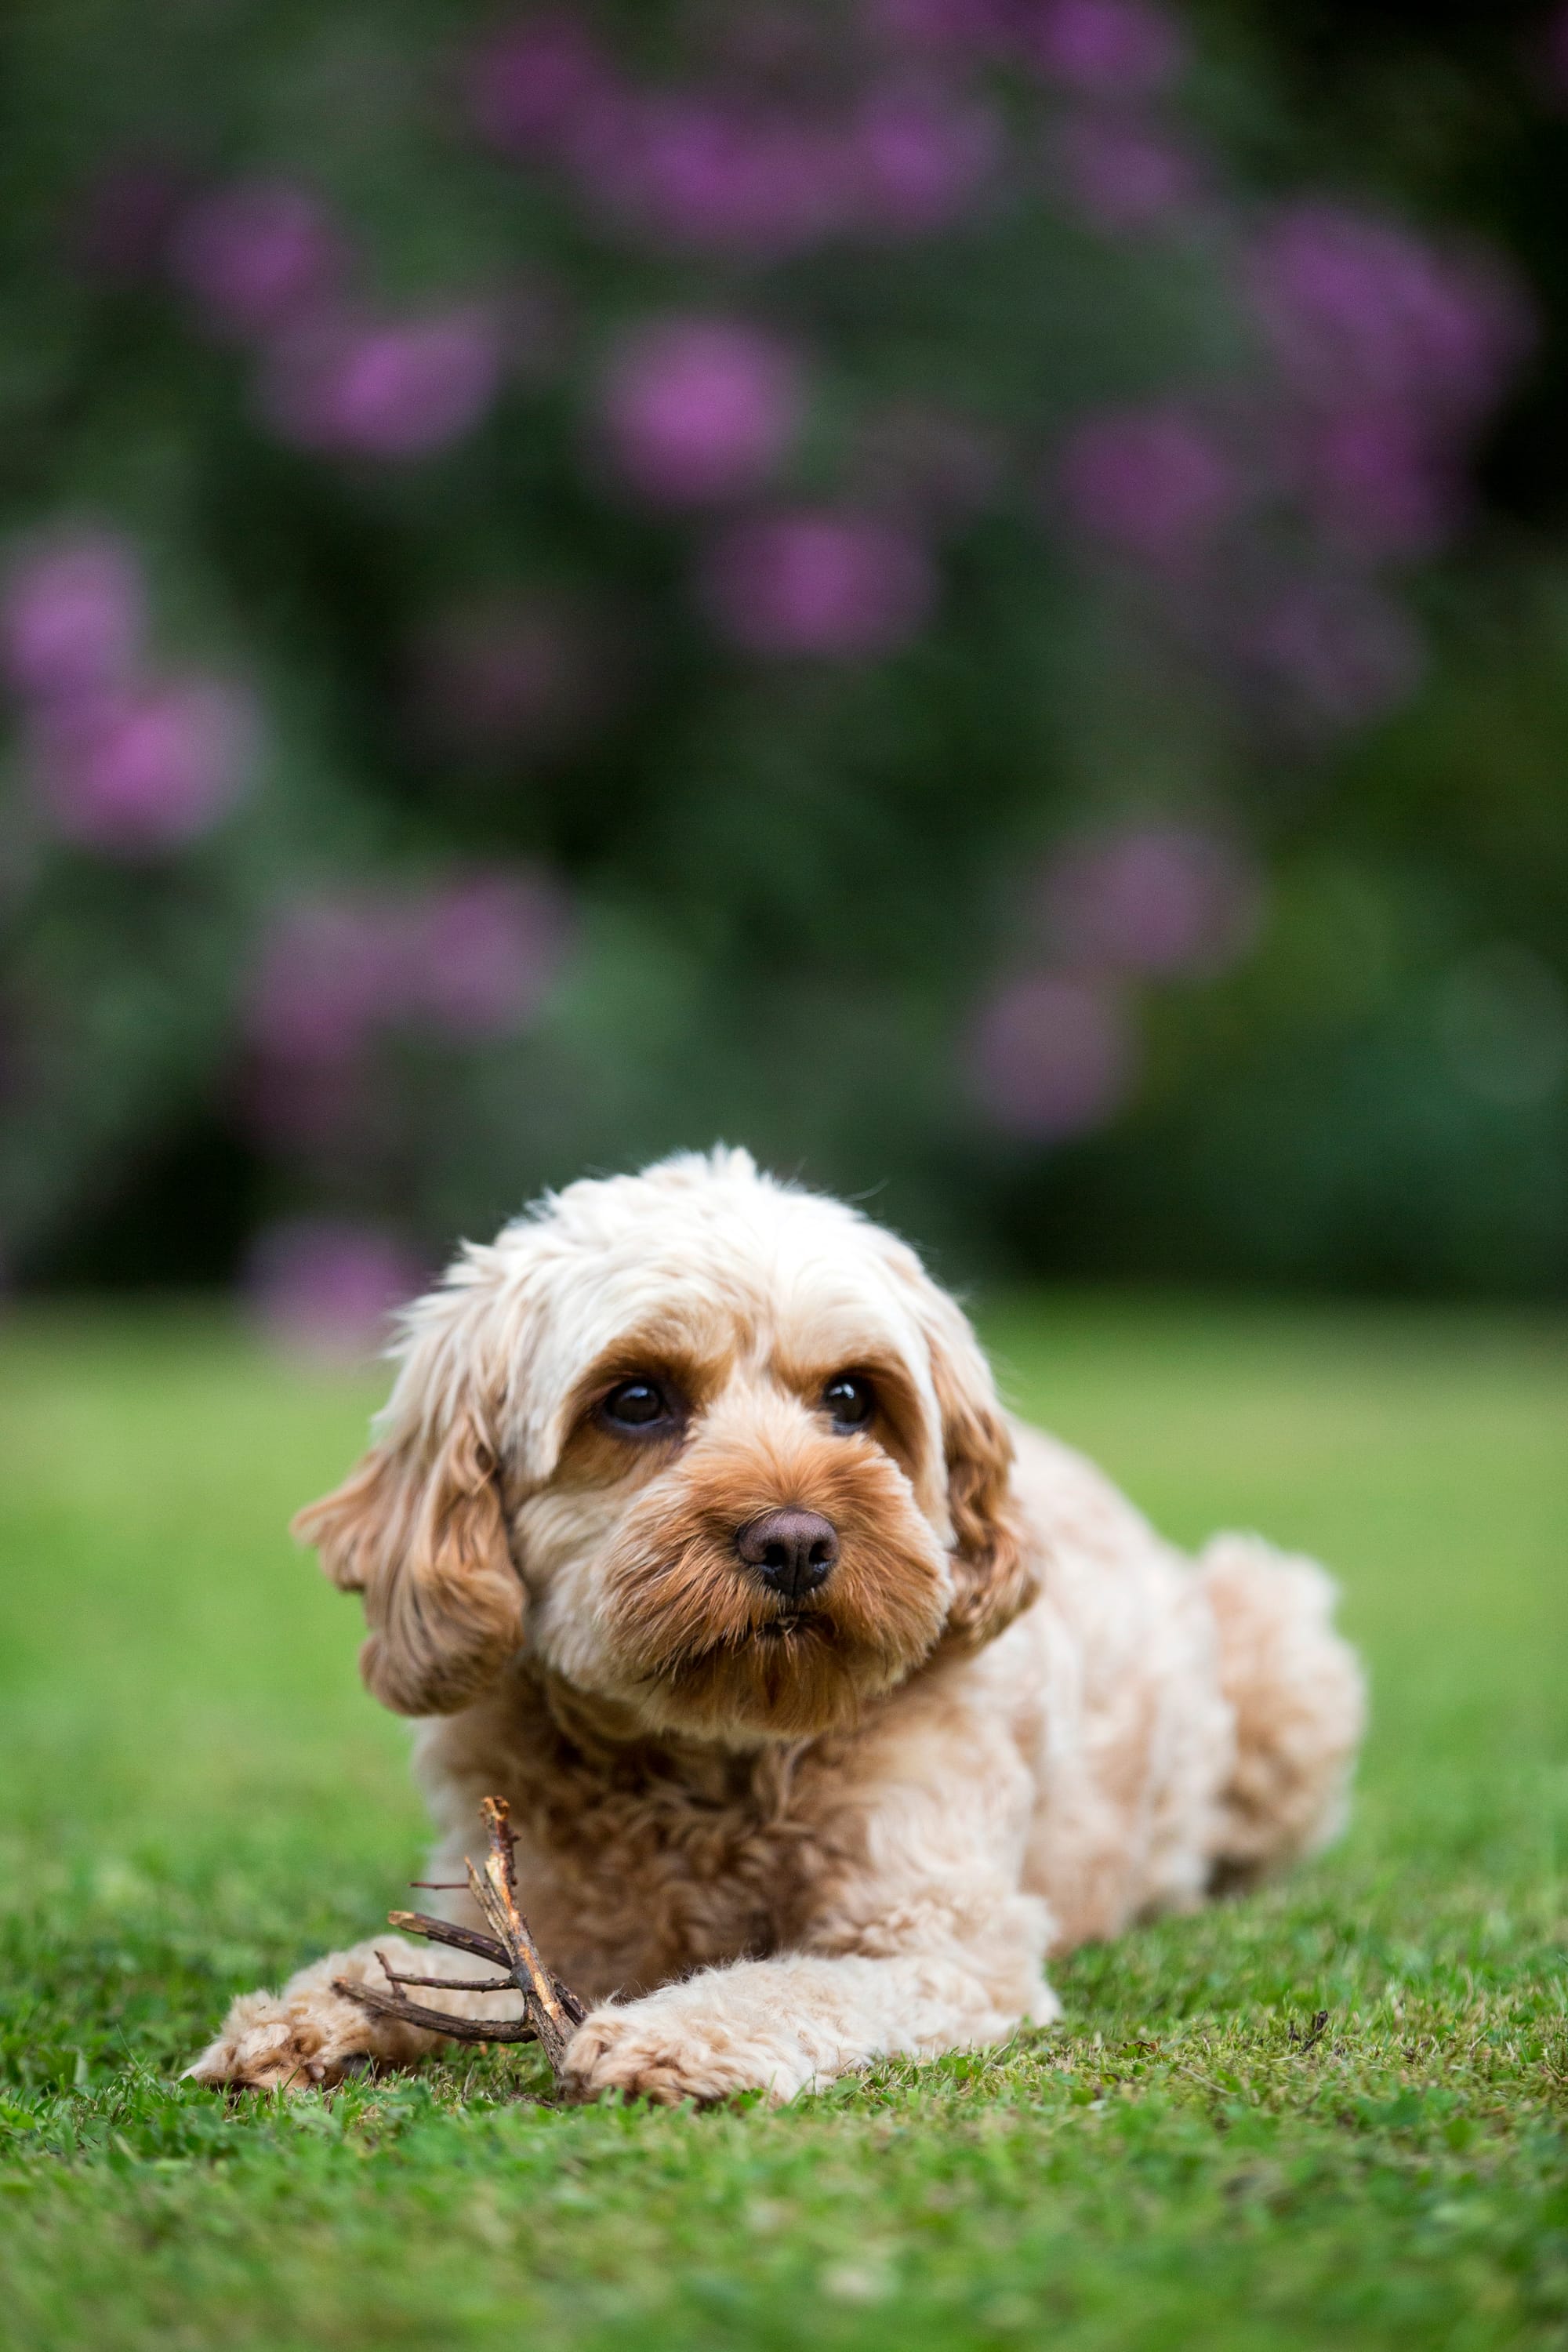 Best Collar for a cavapoo puppy